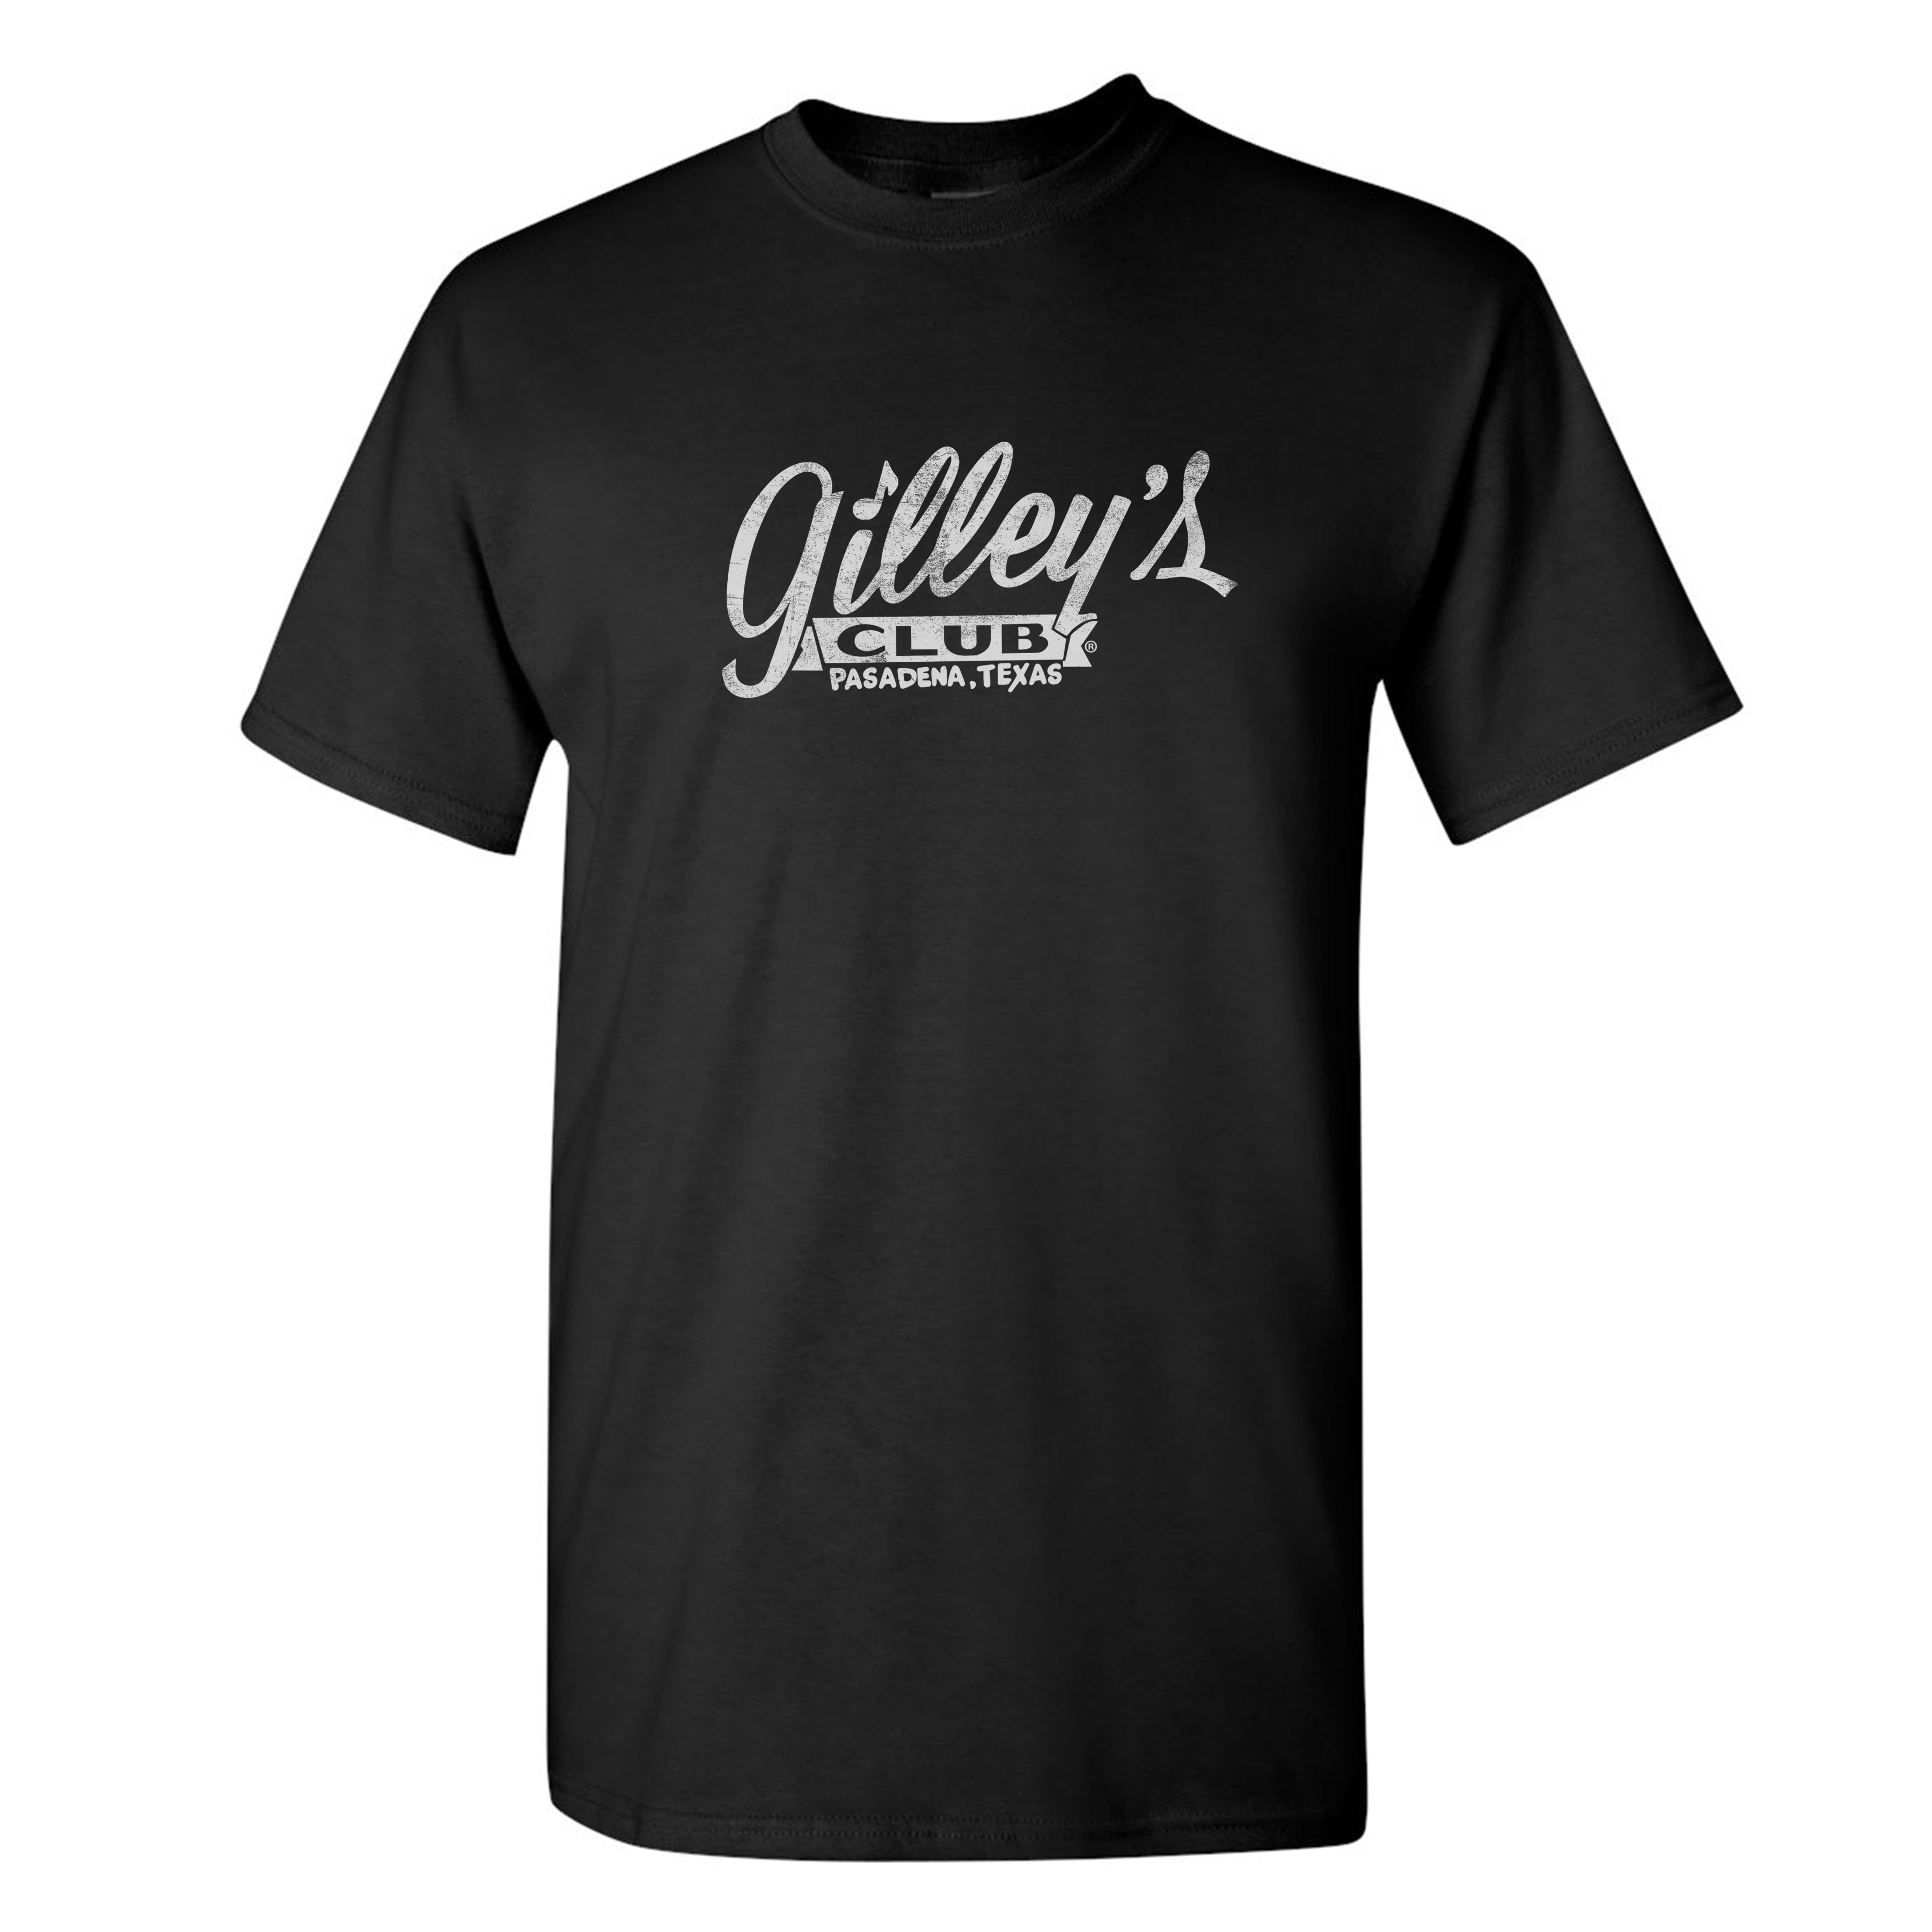 Gilley's Club Tee shirt – Gilley's Store